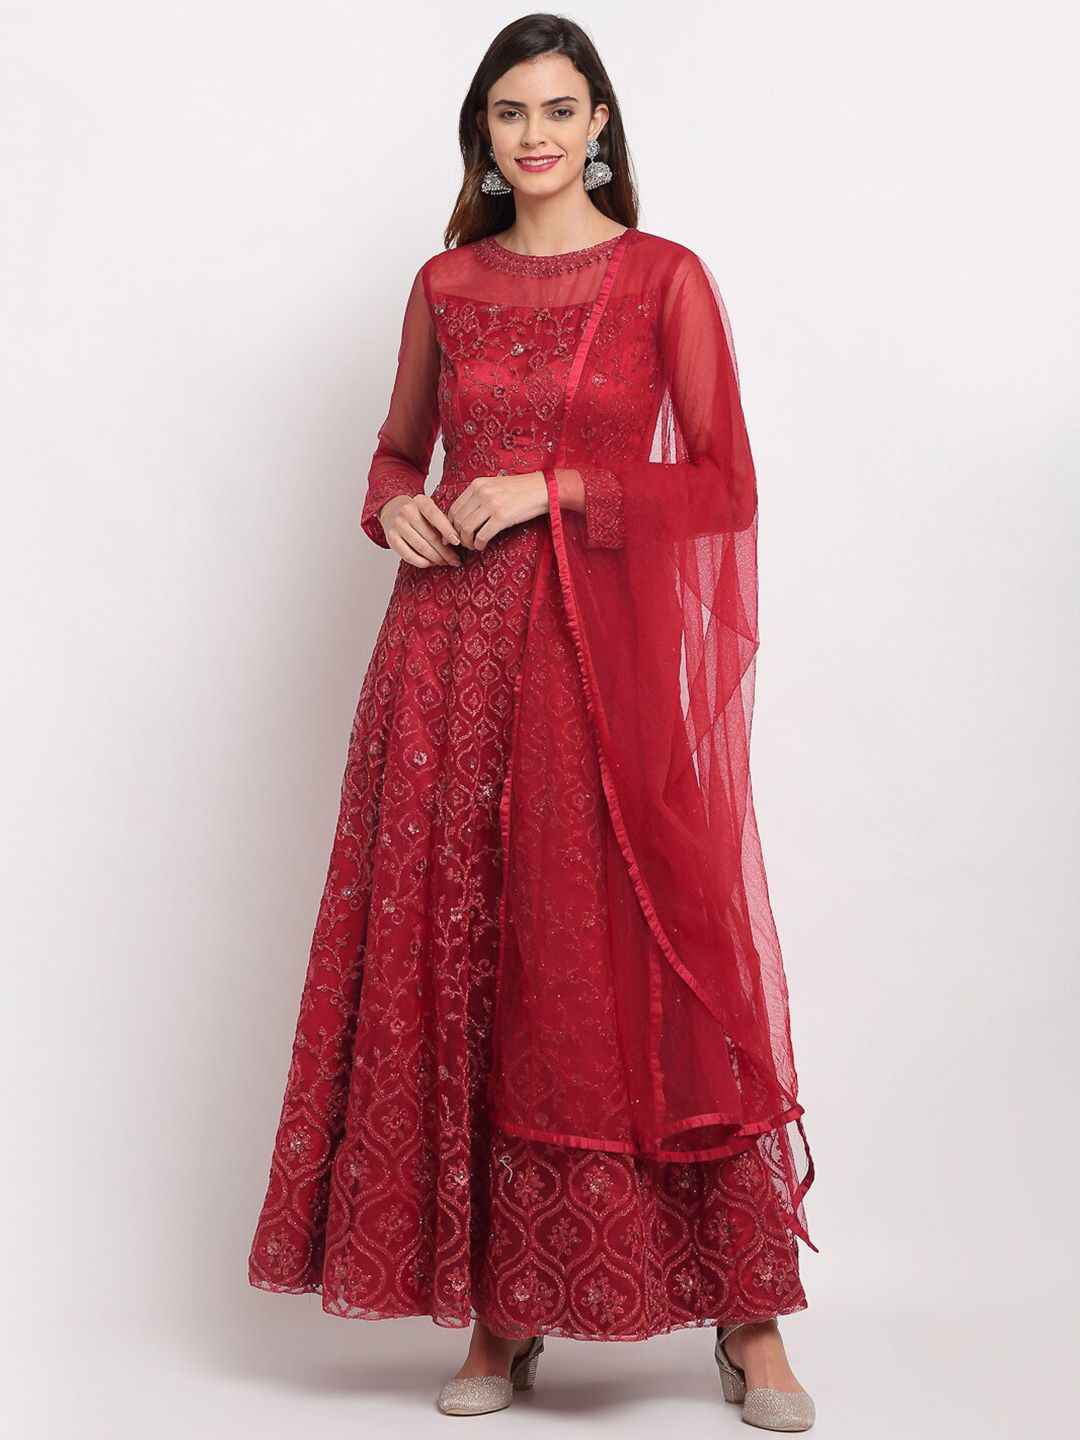 Stylee LIFESTYLE Red Embroidered Semi-Stitched Dress Material Price in India